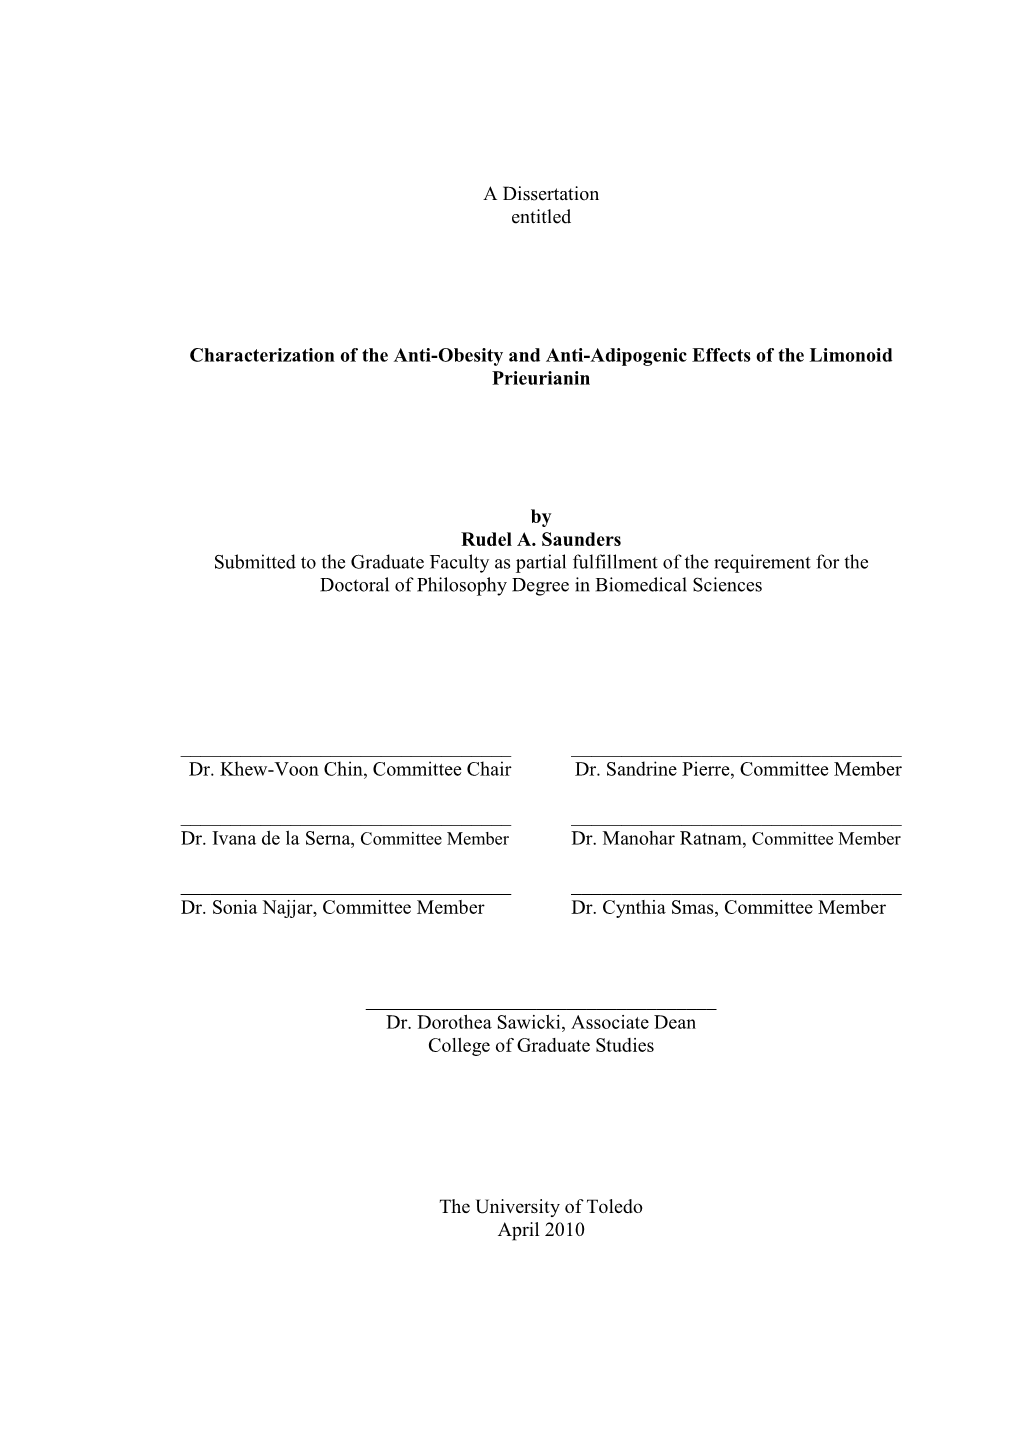 A Dissertation Entitled Characterization of the Anti-Obesity and Anti-Adipogenic Effects of the Limonoid Prieurianin by Rudel A